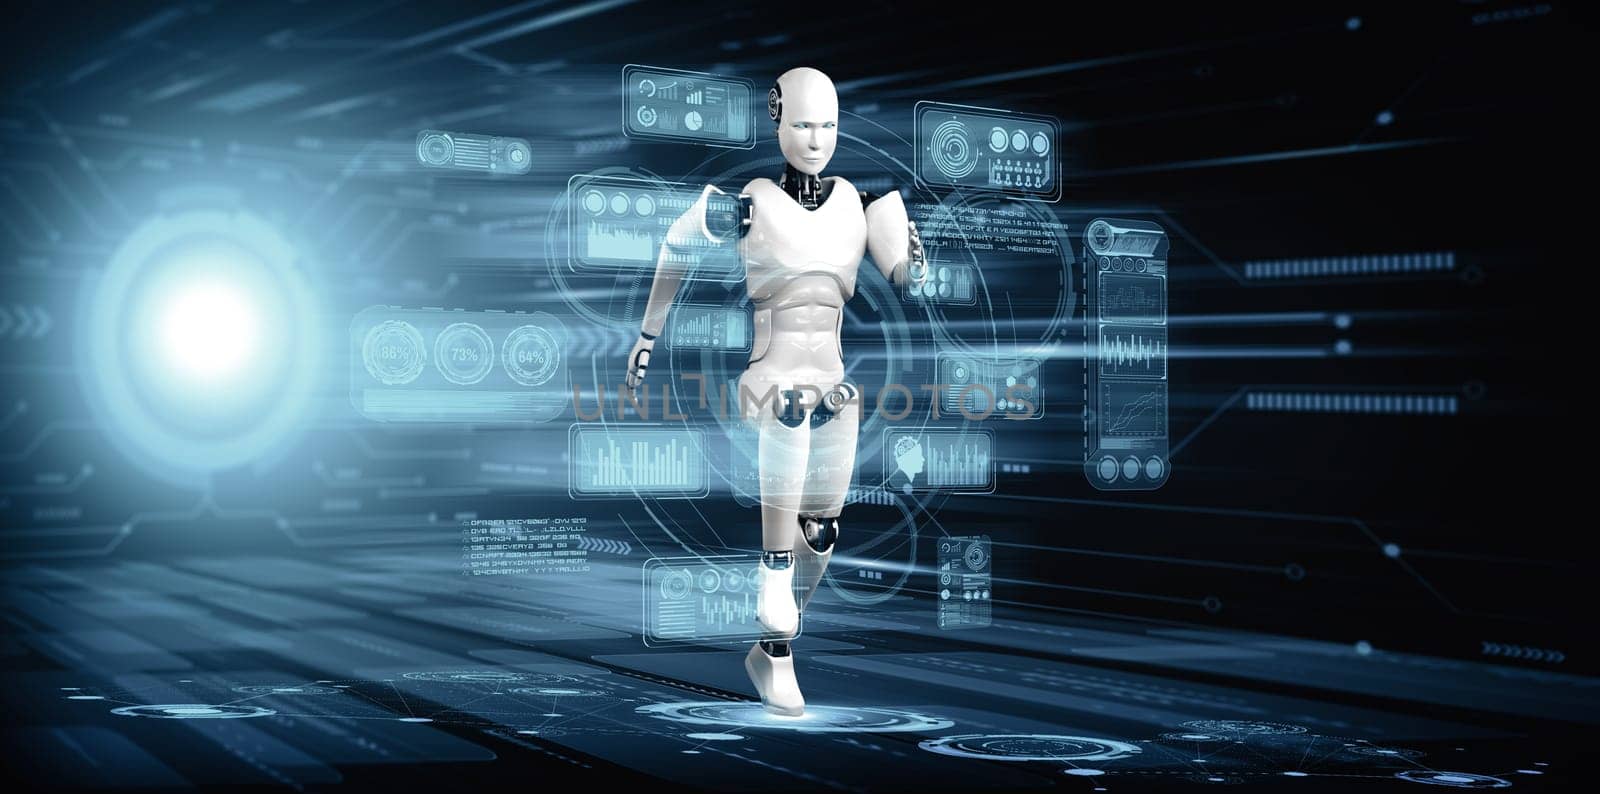 XAI 3d illustration Running robot humanoid showing fast movement and vital energy in concept of future innovation development toward AI brain and artificial intelligence thinking by machine learning. 3D illustration.